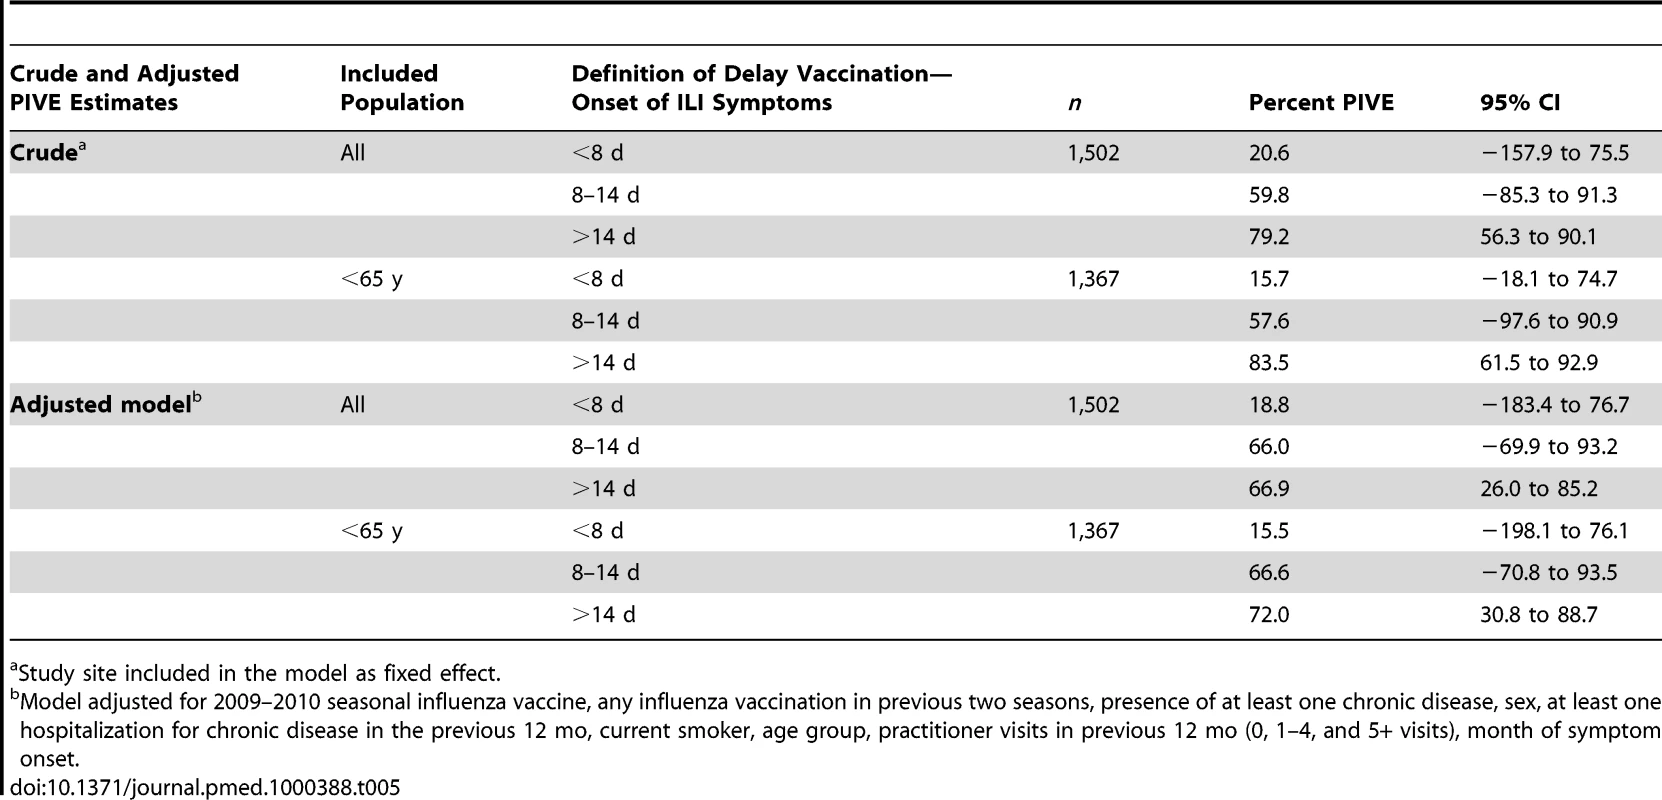 Pooled crude and adjusted PIVE, according to categories based on delay between date of vaccination and date of onset of symptoms.